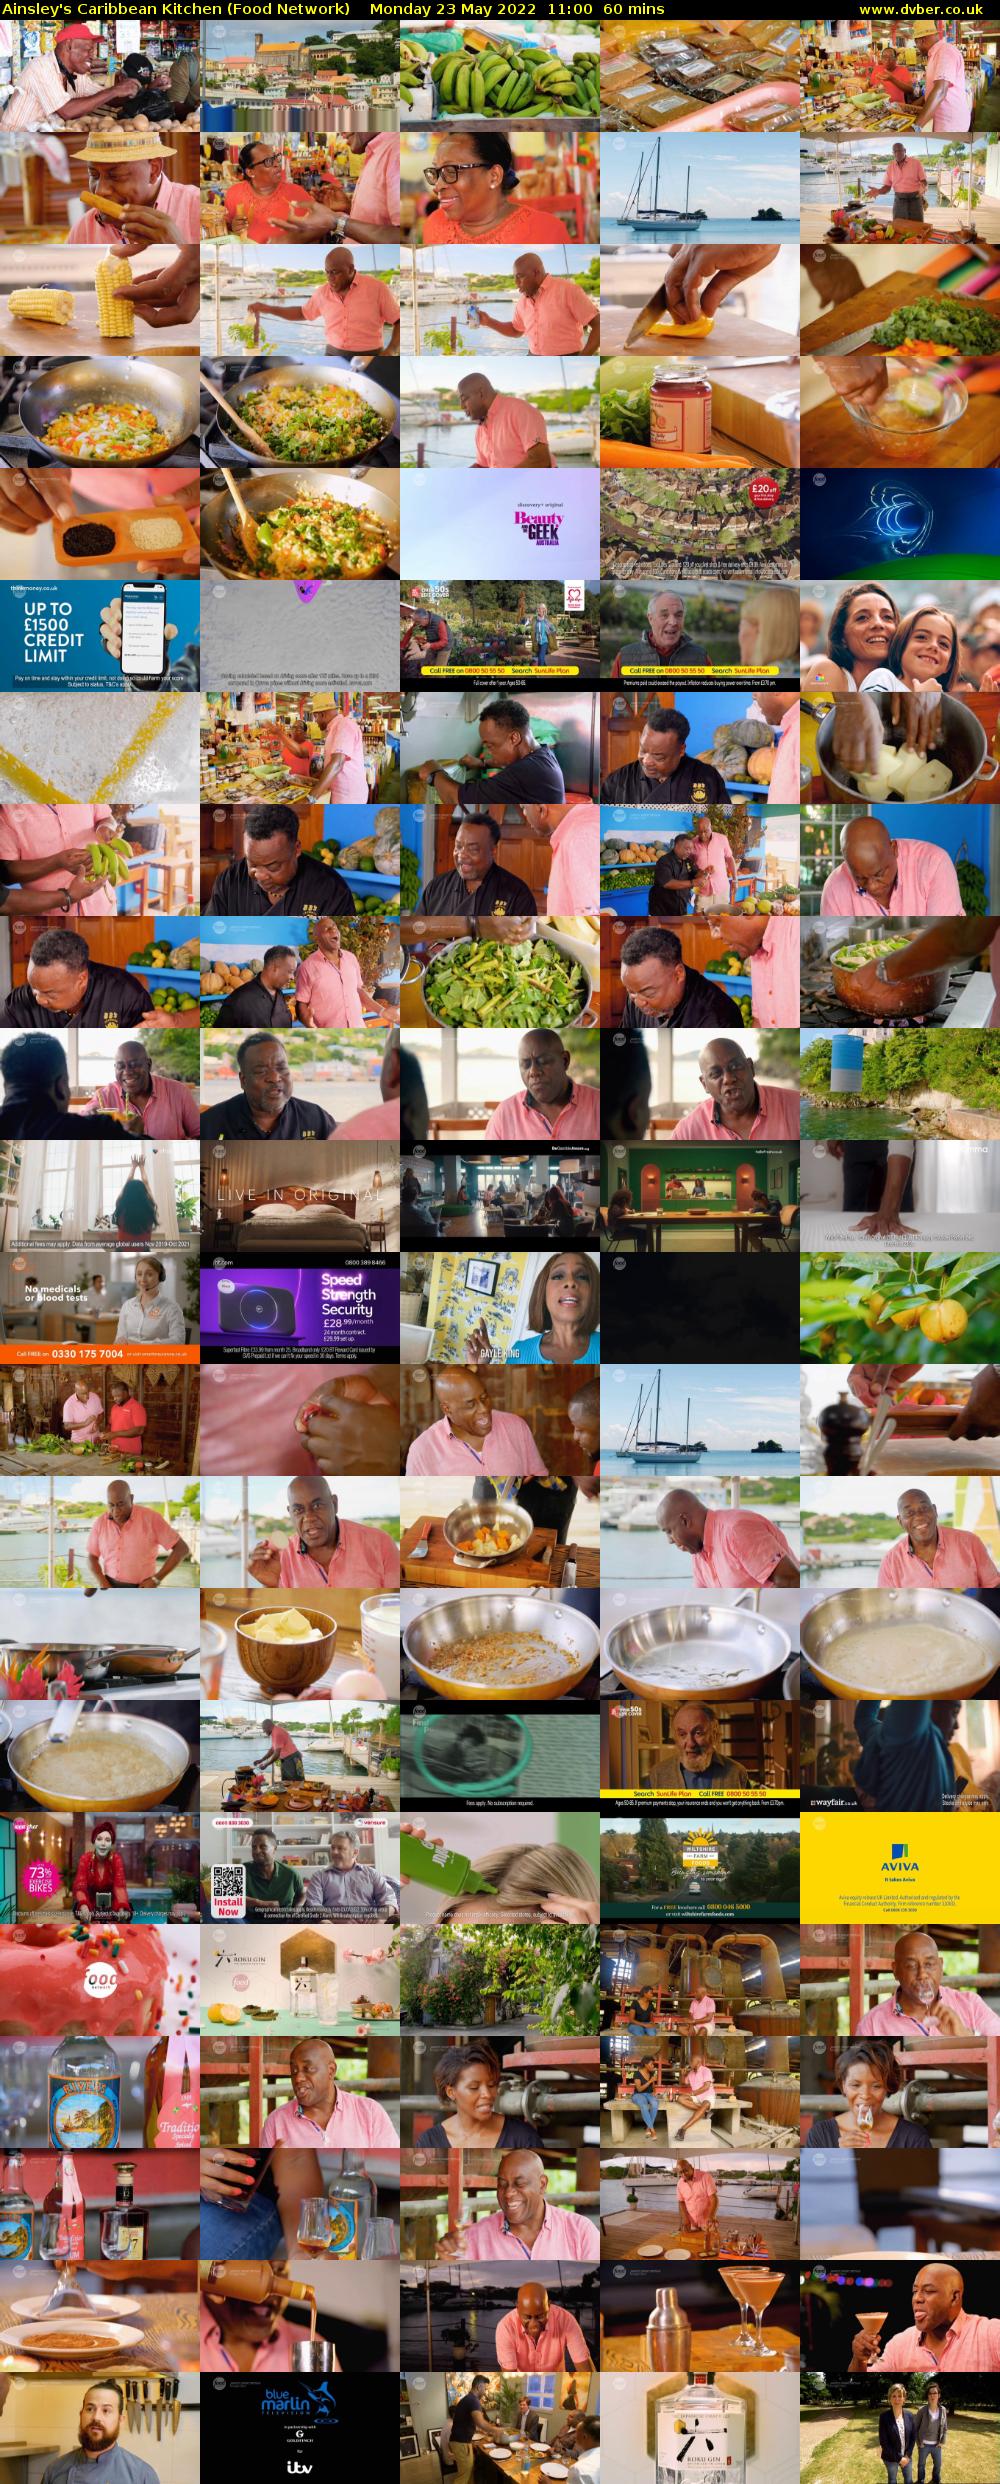 Ainsley's Caribbean Kitchen (Food Network) Monday 23 May 2022 11:00 - 12:00